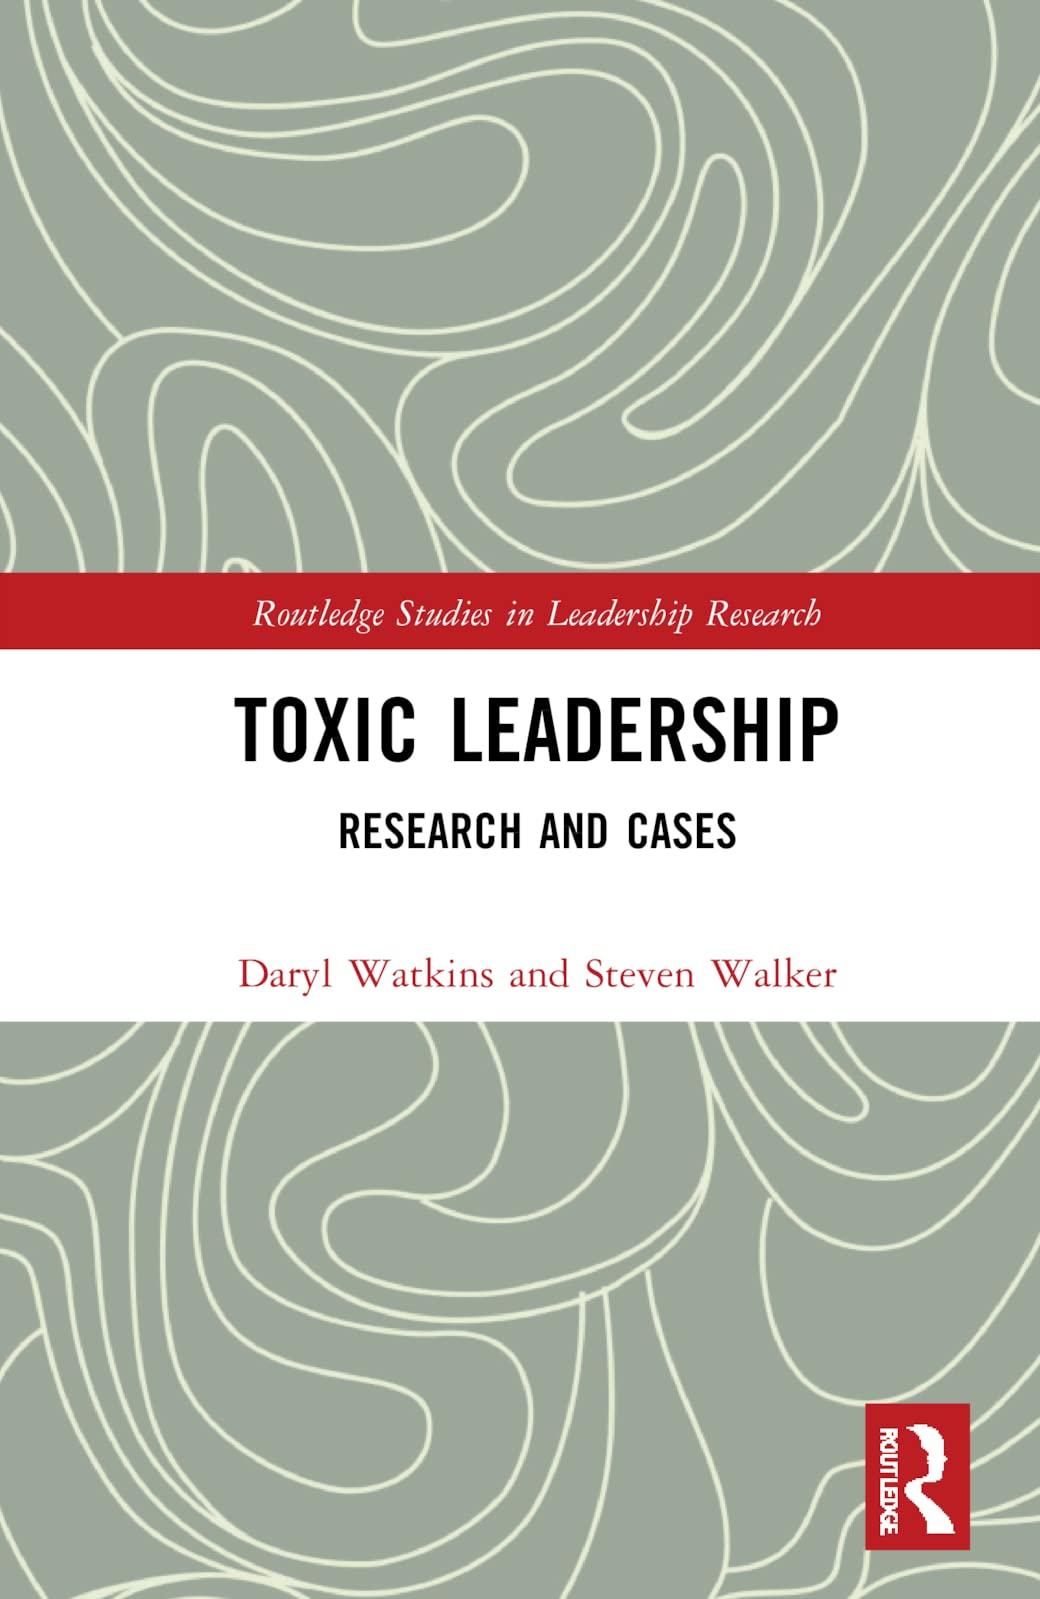 toxic leadership research and cases 1st edition steven m. walker, daryl watkins 1032064617, 978-1032064611